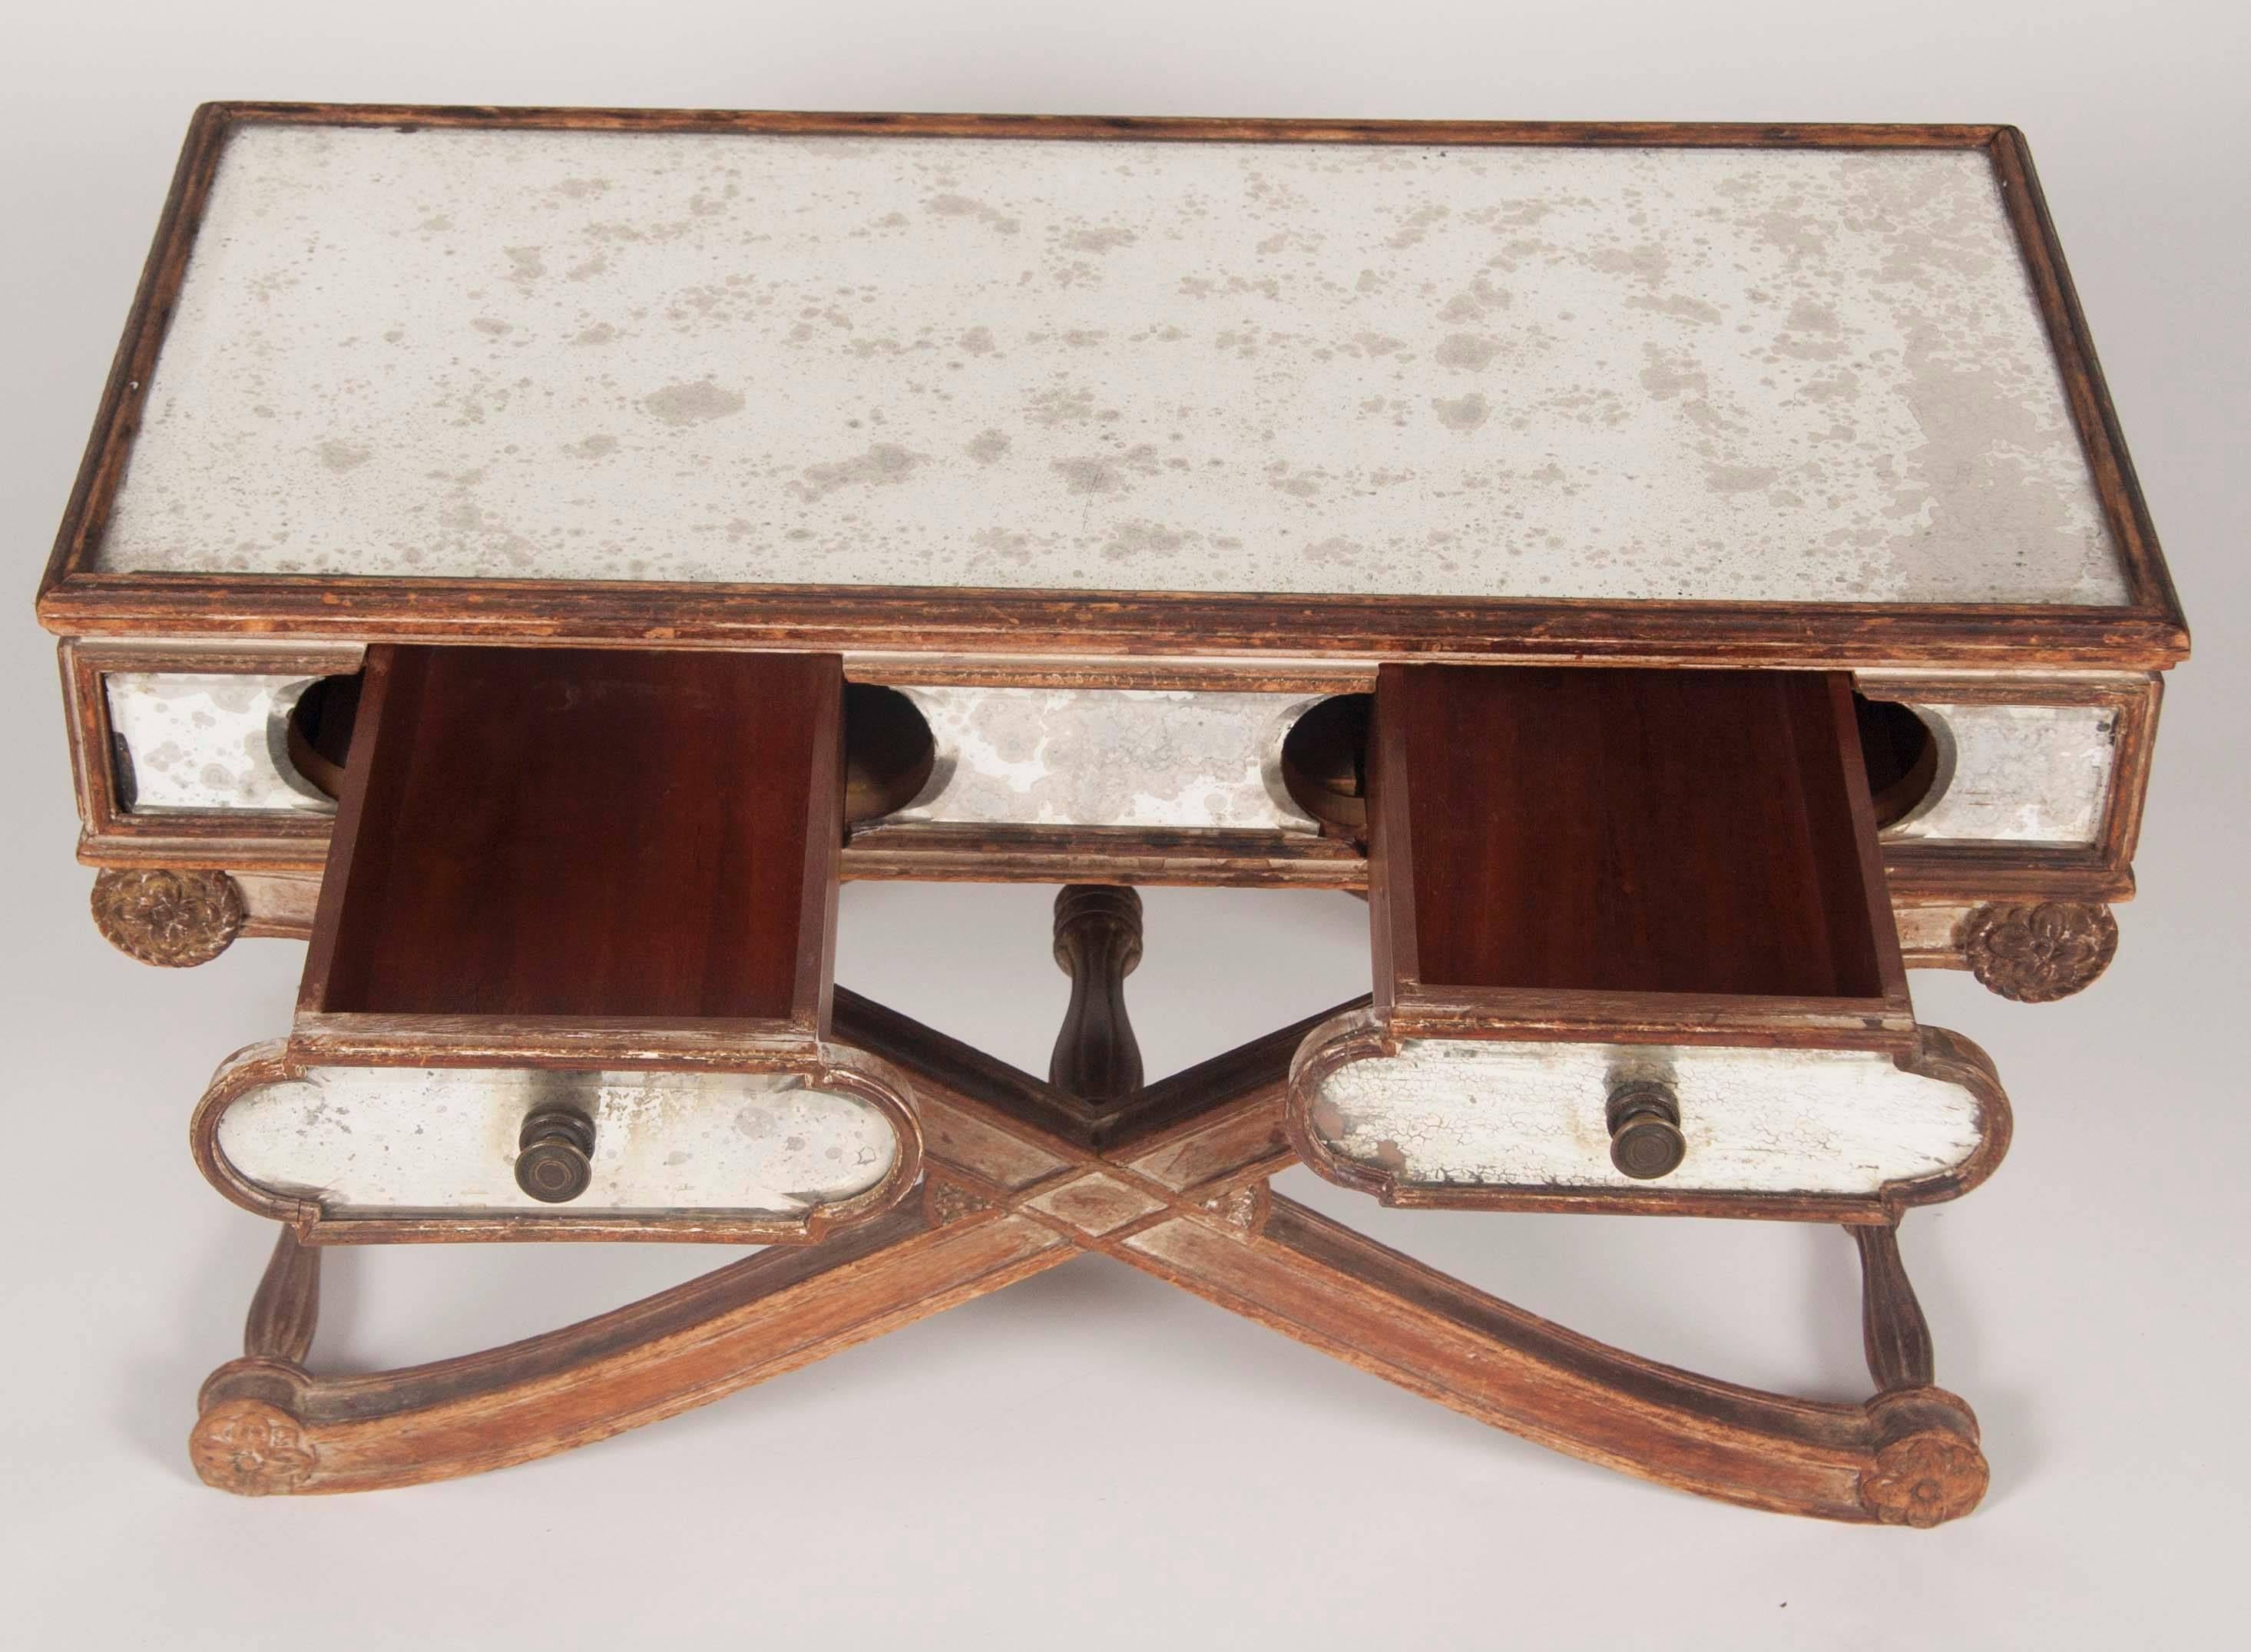 Italian Mid-20th Century Cerused Wood Mirrored Coffee Table with X-form Base For Sale 2